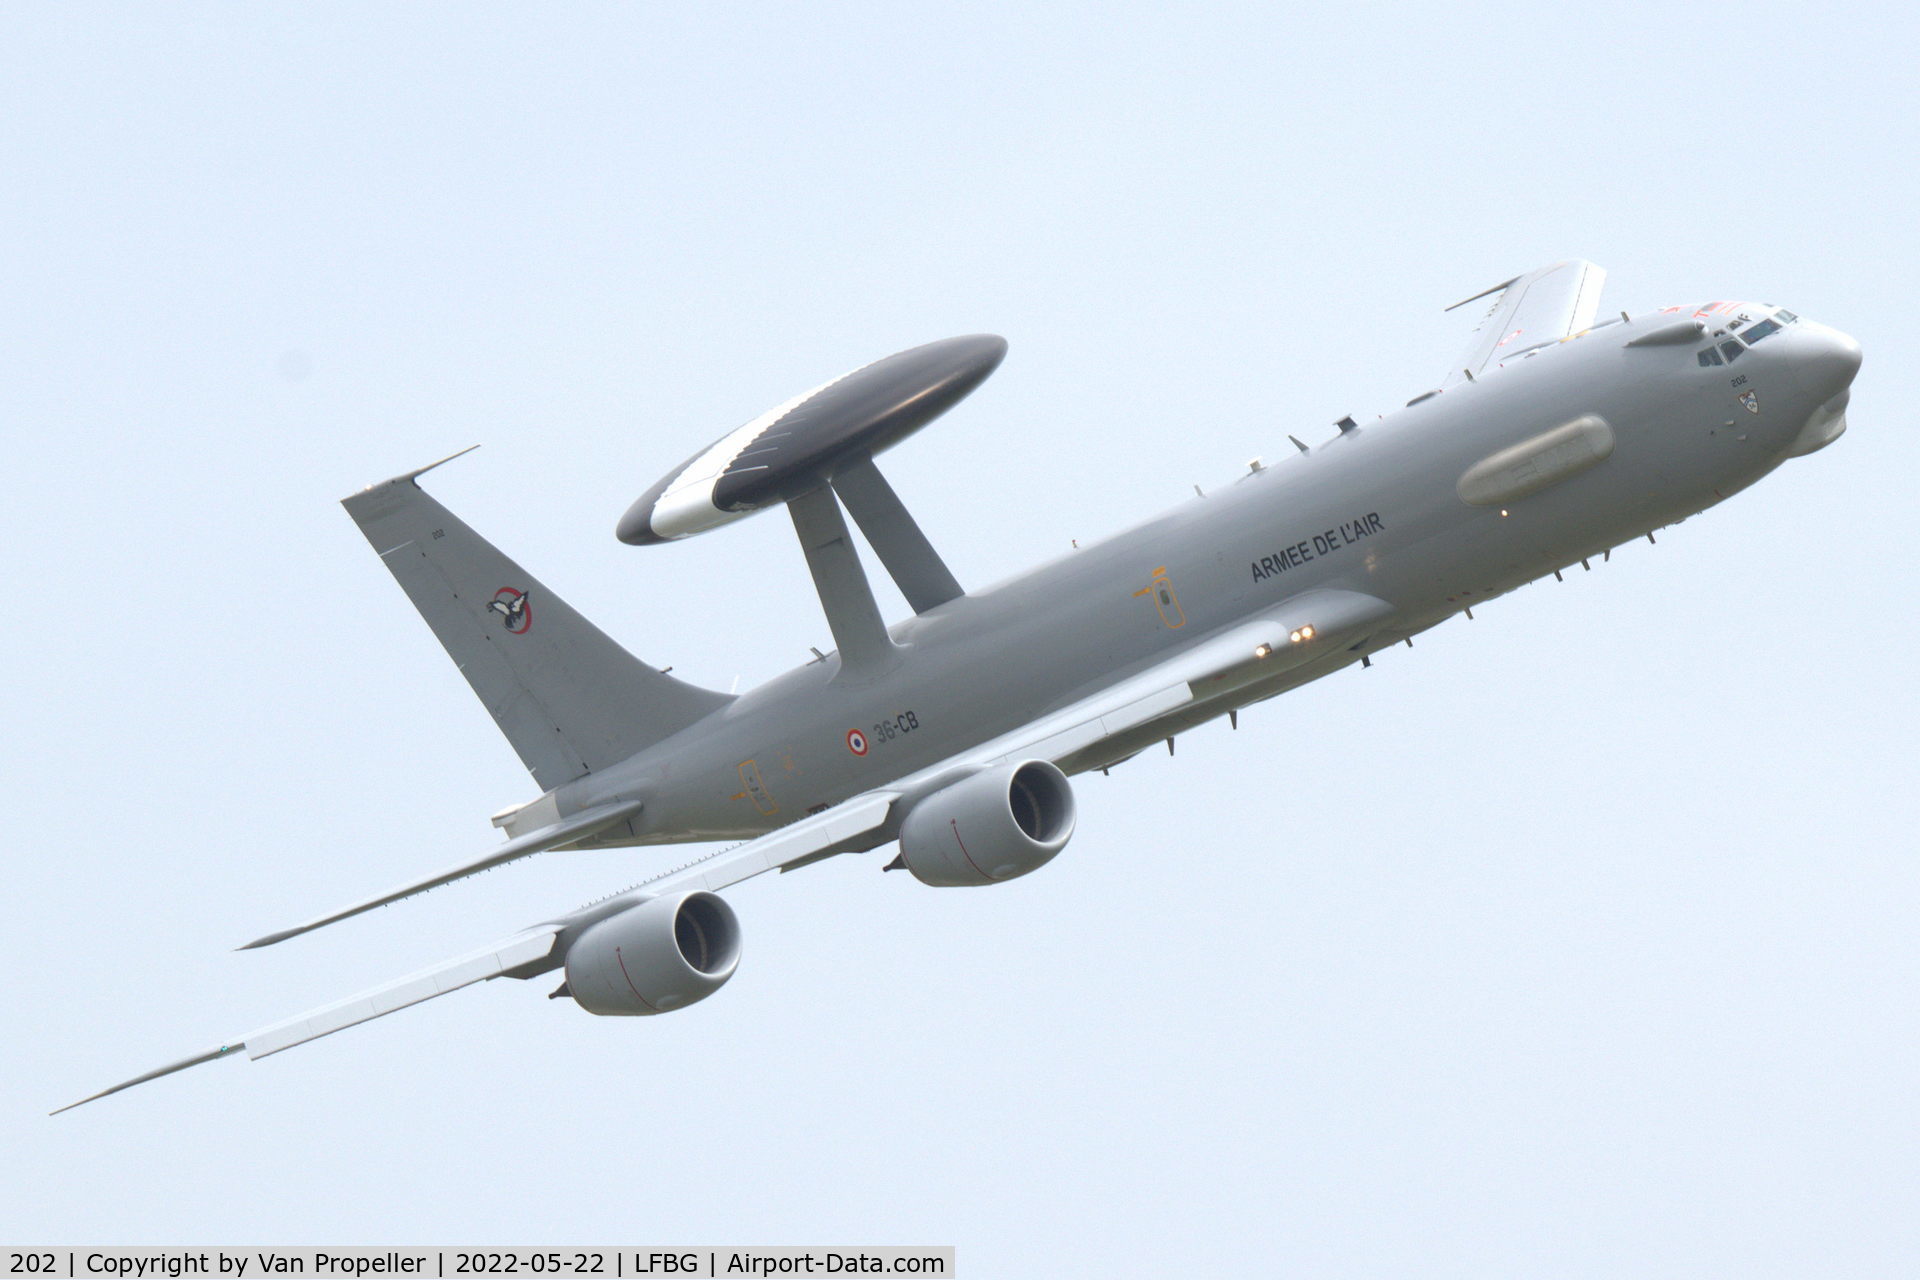 202, 1990 Boeing E-3F (707-300) Sentry C/N 24116, French Air Force Boeing E-3F Sentry overflight at BA709 Cognac - Châteaubernard air base, France, 22 may 2022